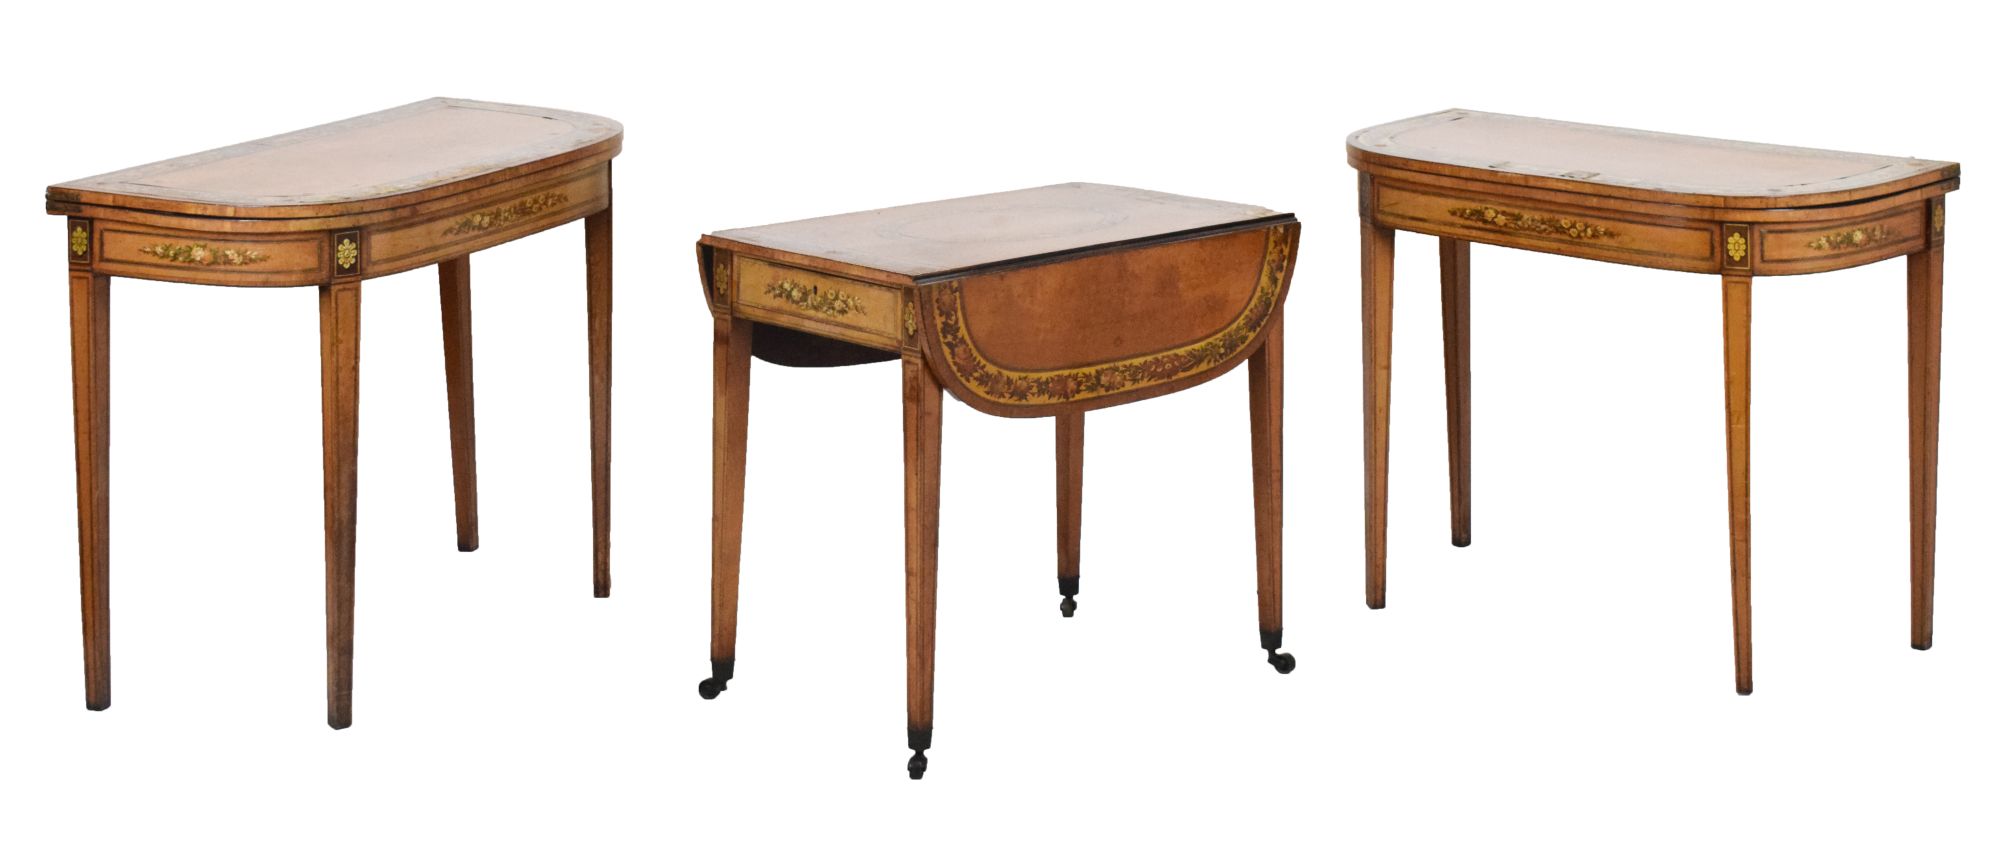 Rare suite of three early 19th Century painted satinwood tables Sold for £8,000